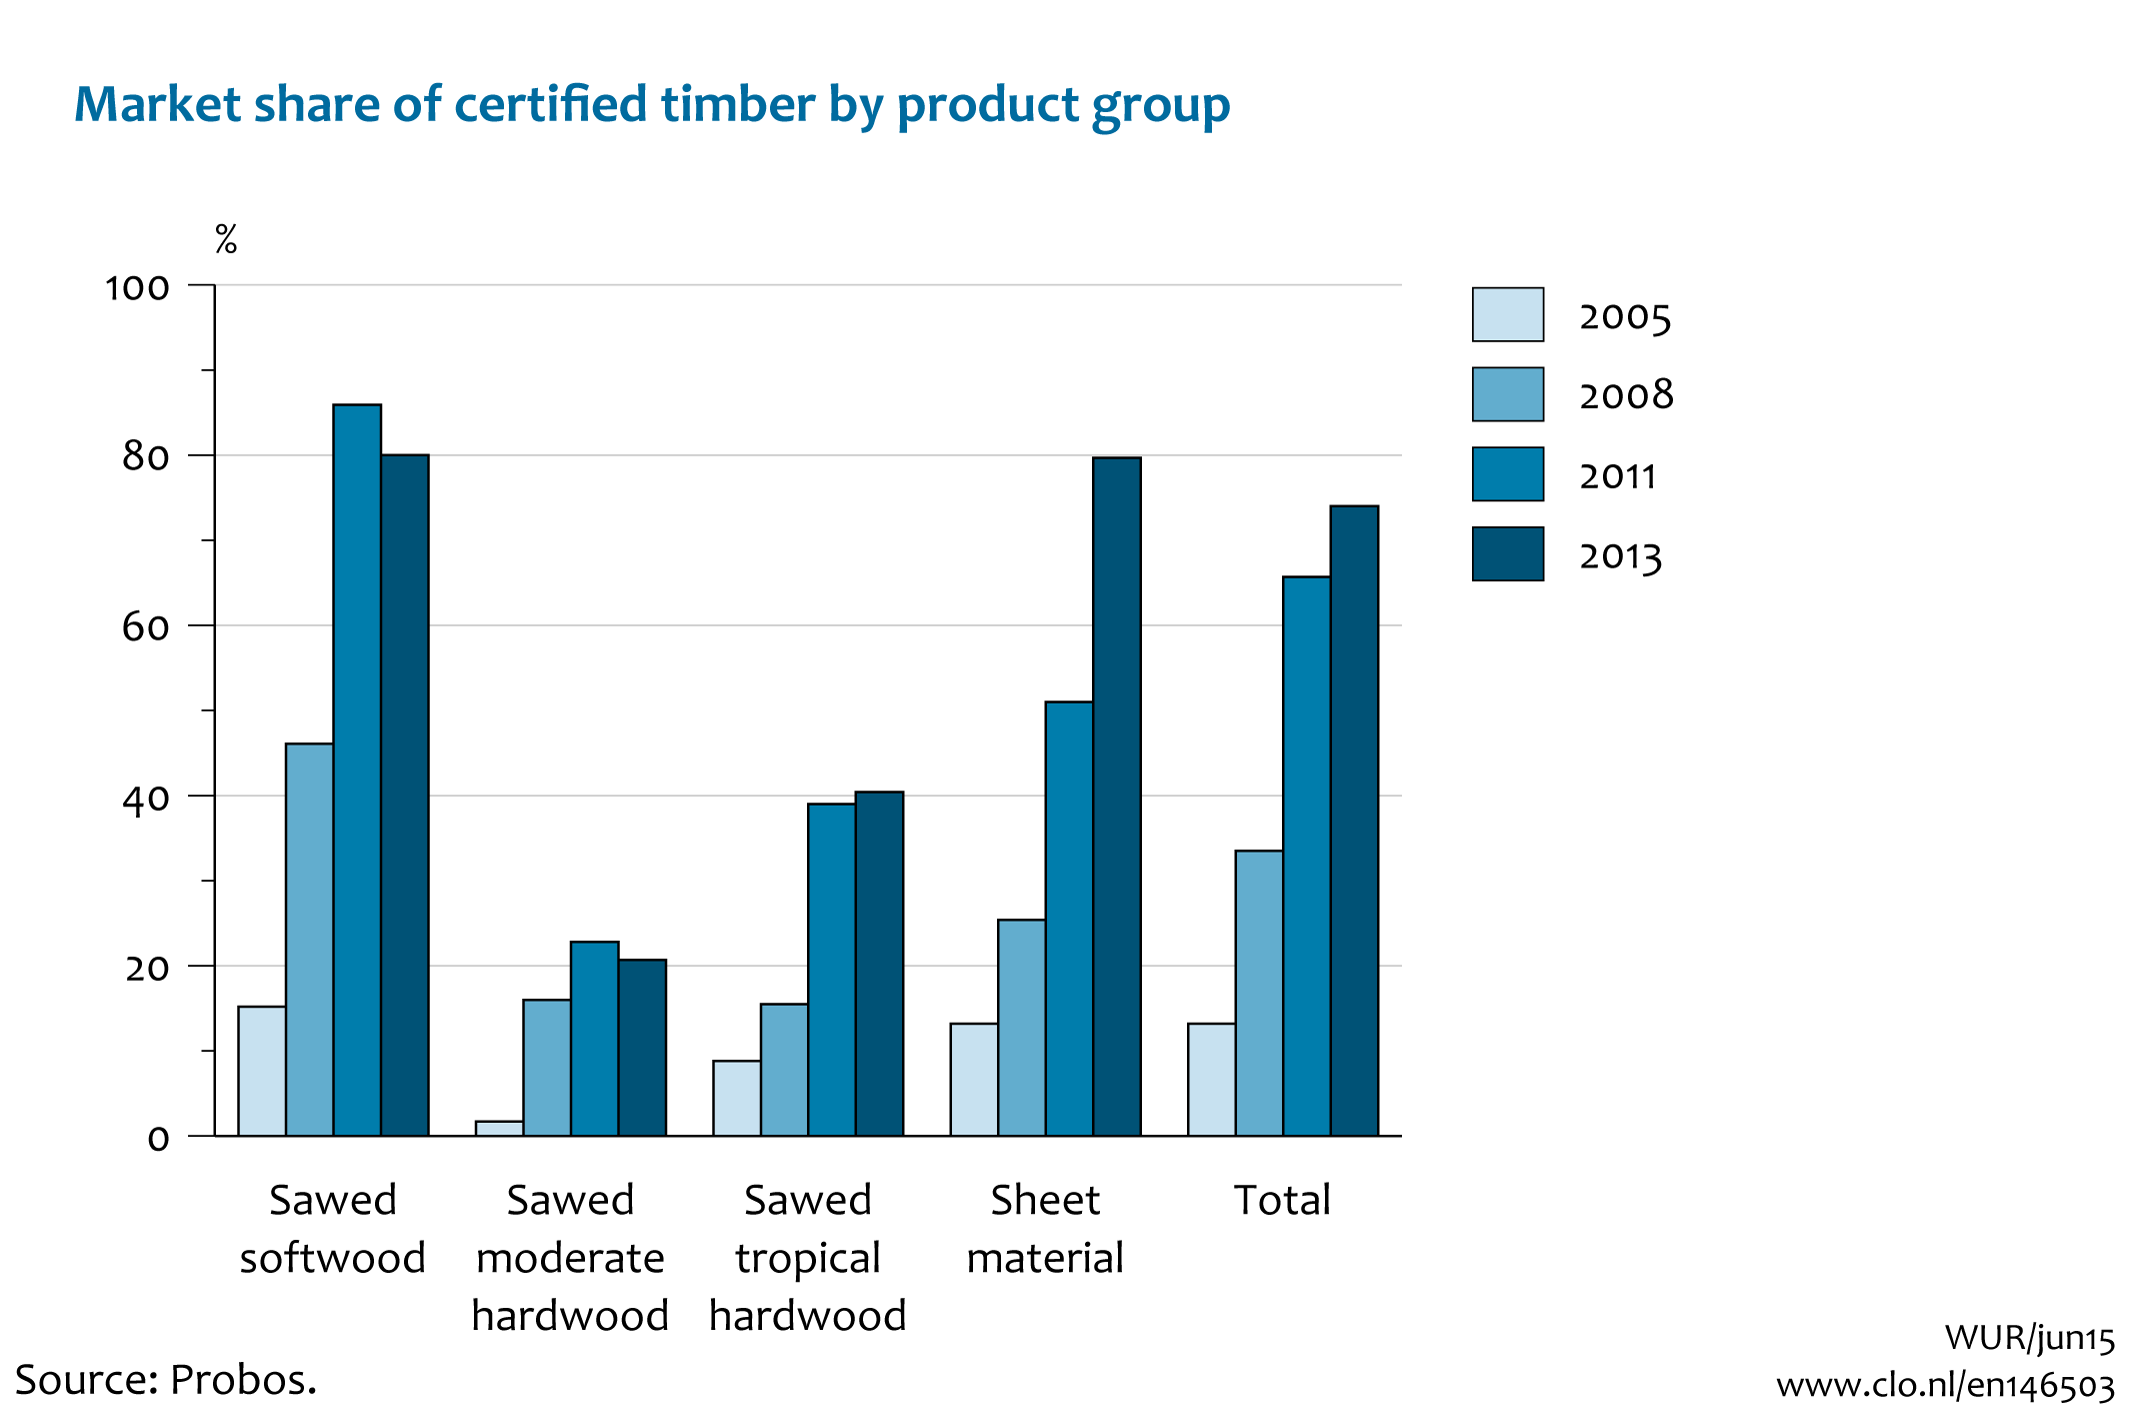 Image Market share of sustainable produced wood by product category. The image is further explained in the text.